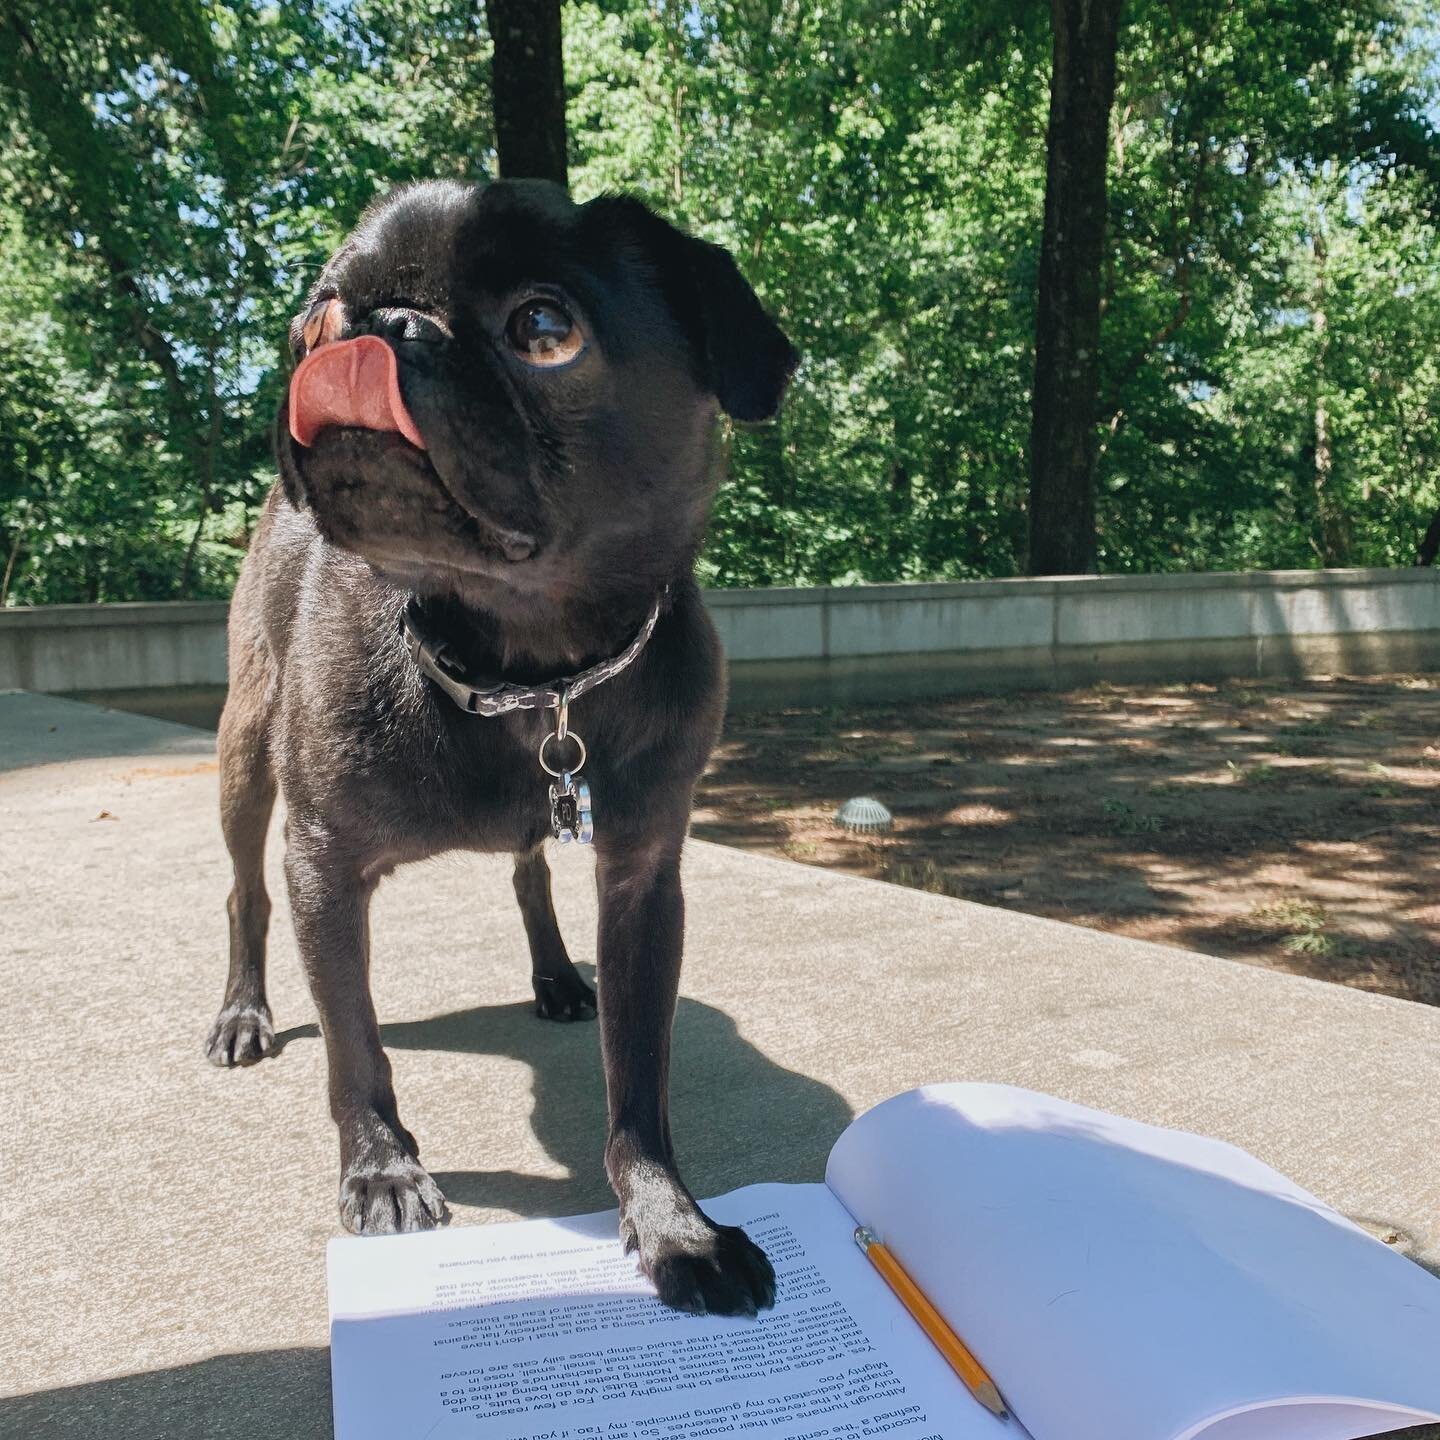 Just perusing the final edits on my book - &ldquo;Get Me Out Of Here! Reflections Of PD The Put Upon Pug&rdquo; as we near our Summer release date!! All you humans can preorder now on my fabulous website: PDThePugProductions.com. Use Promo Code PD123